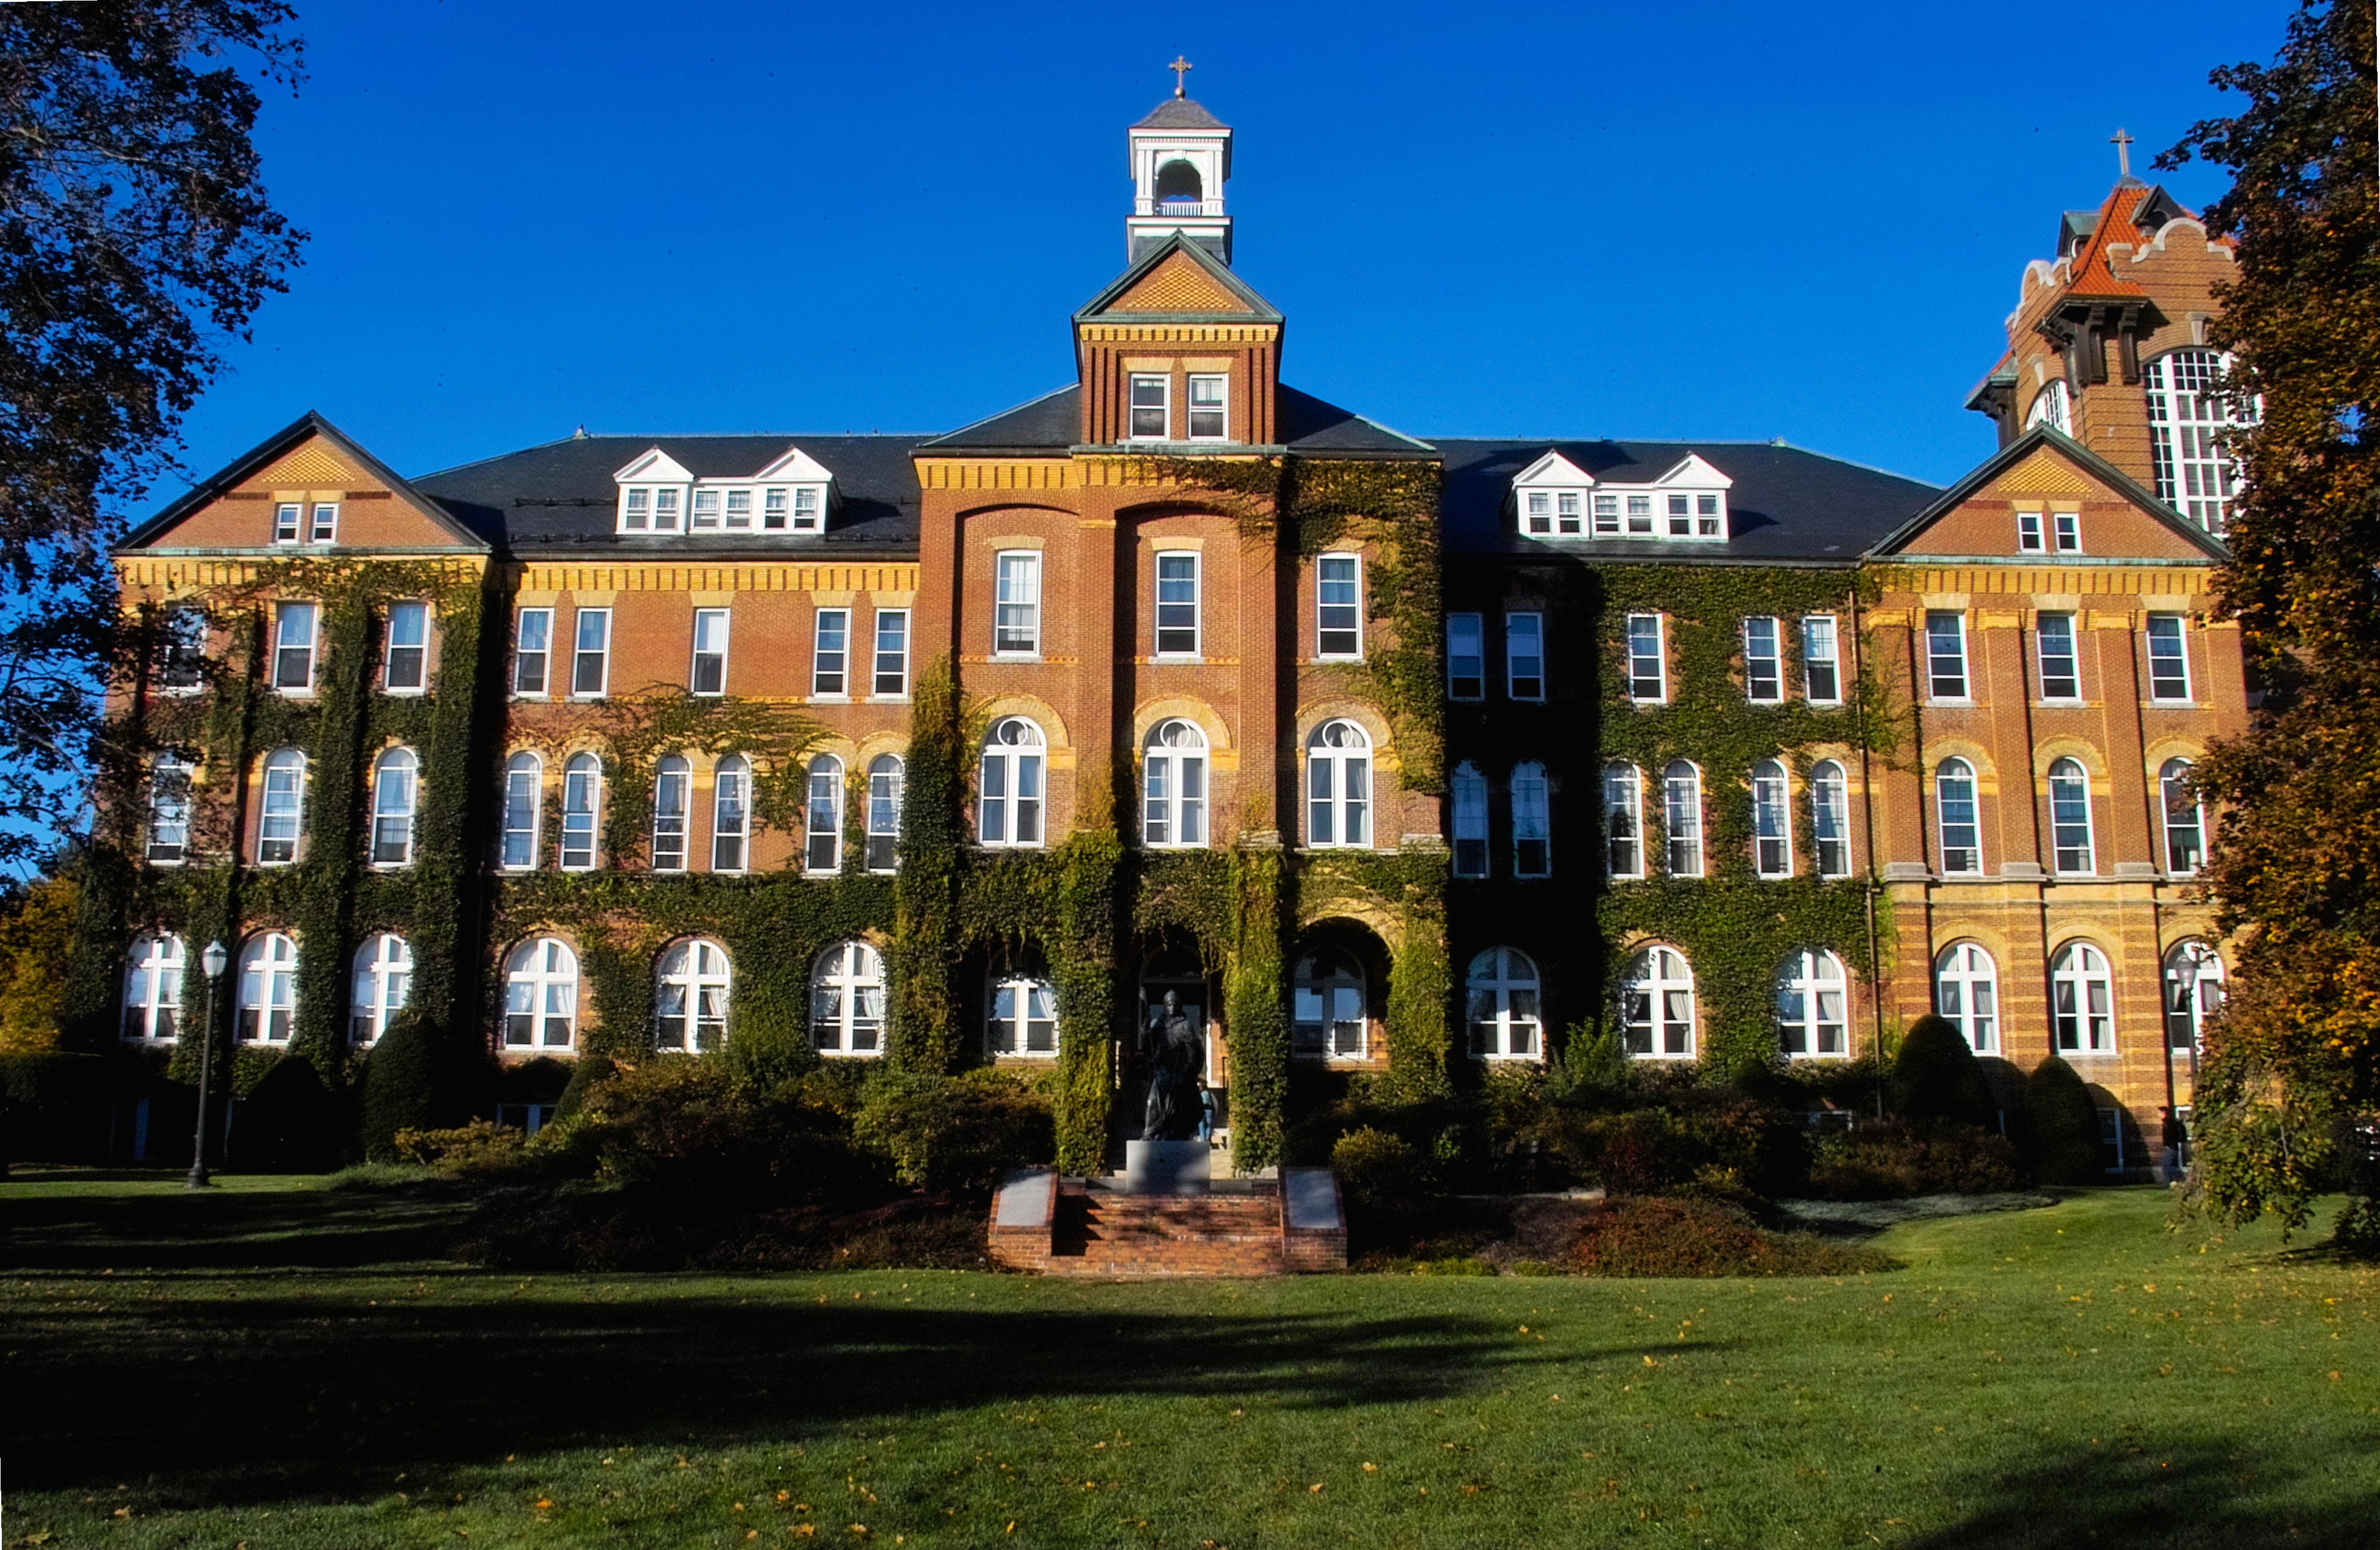 Alumni Hall at Saint Anselm College in Goffstown, New Hampshire